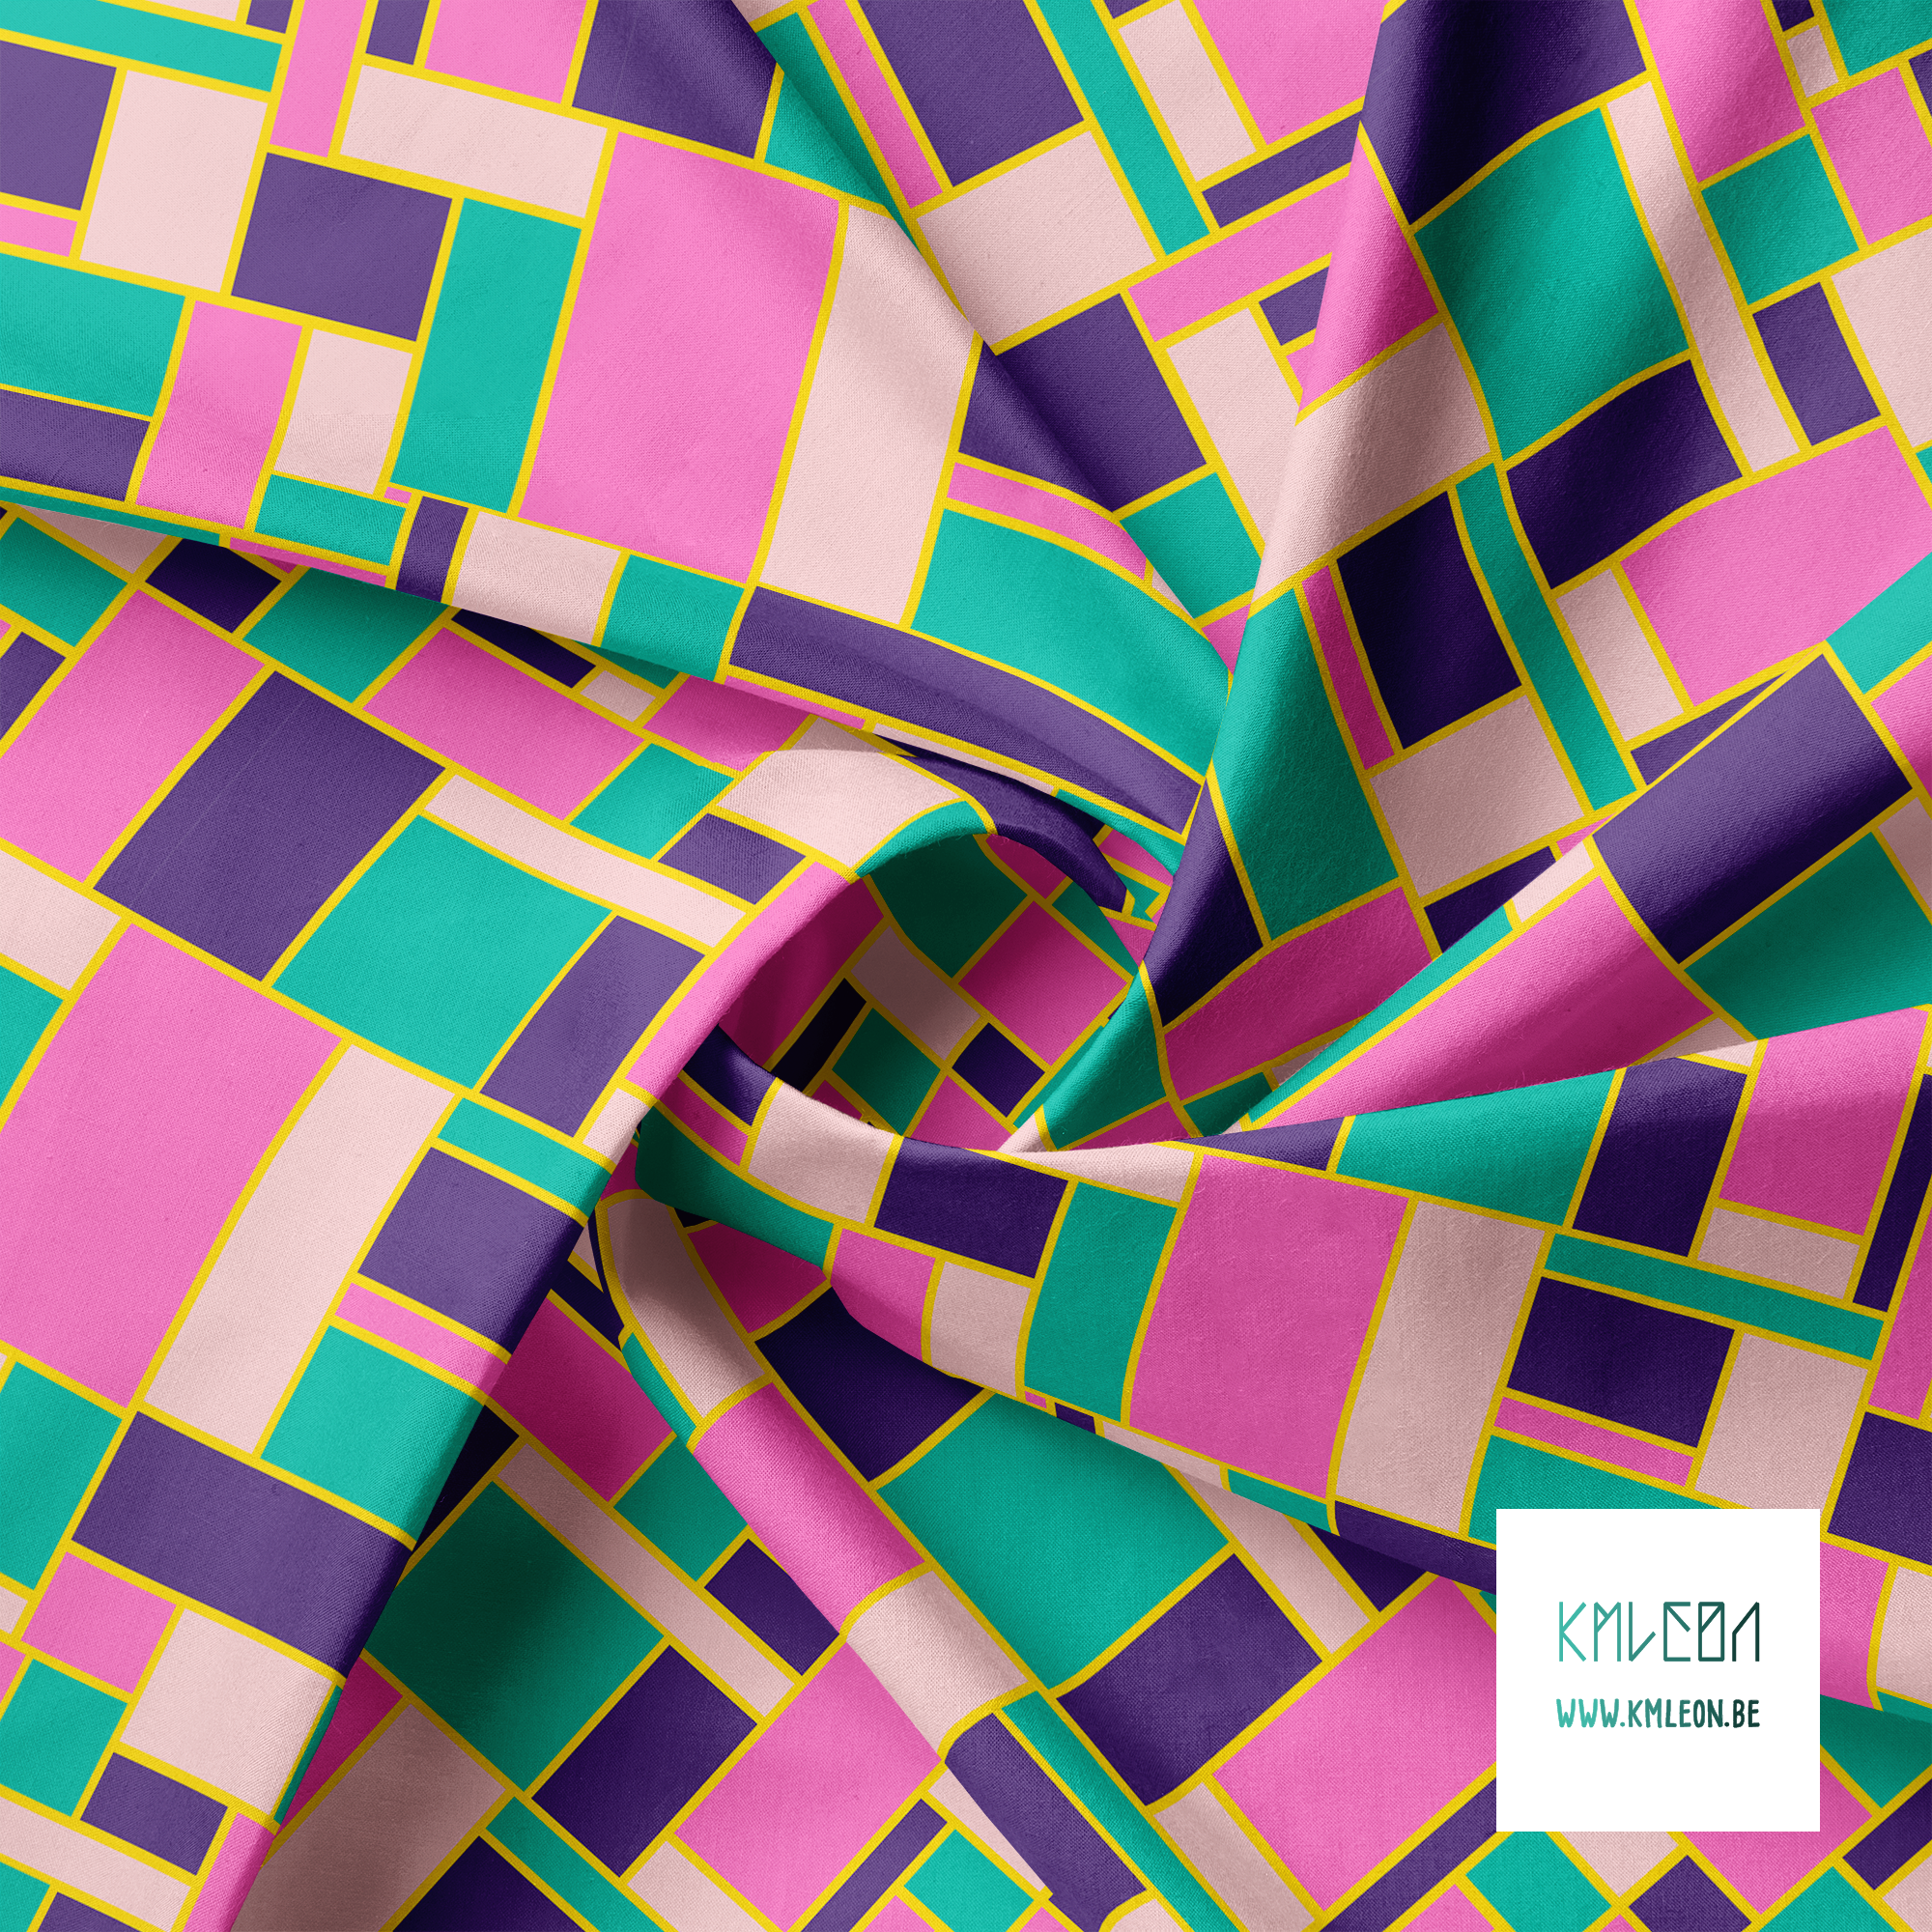 Purple, green and pink rectangles fabric